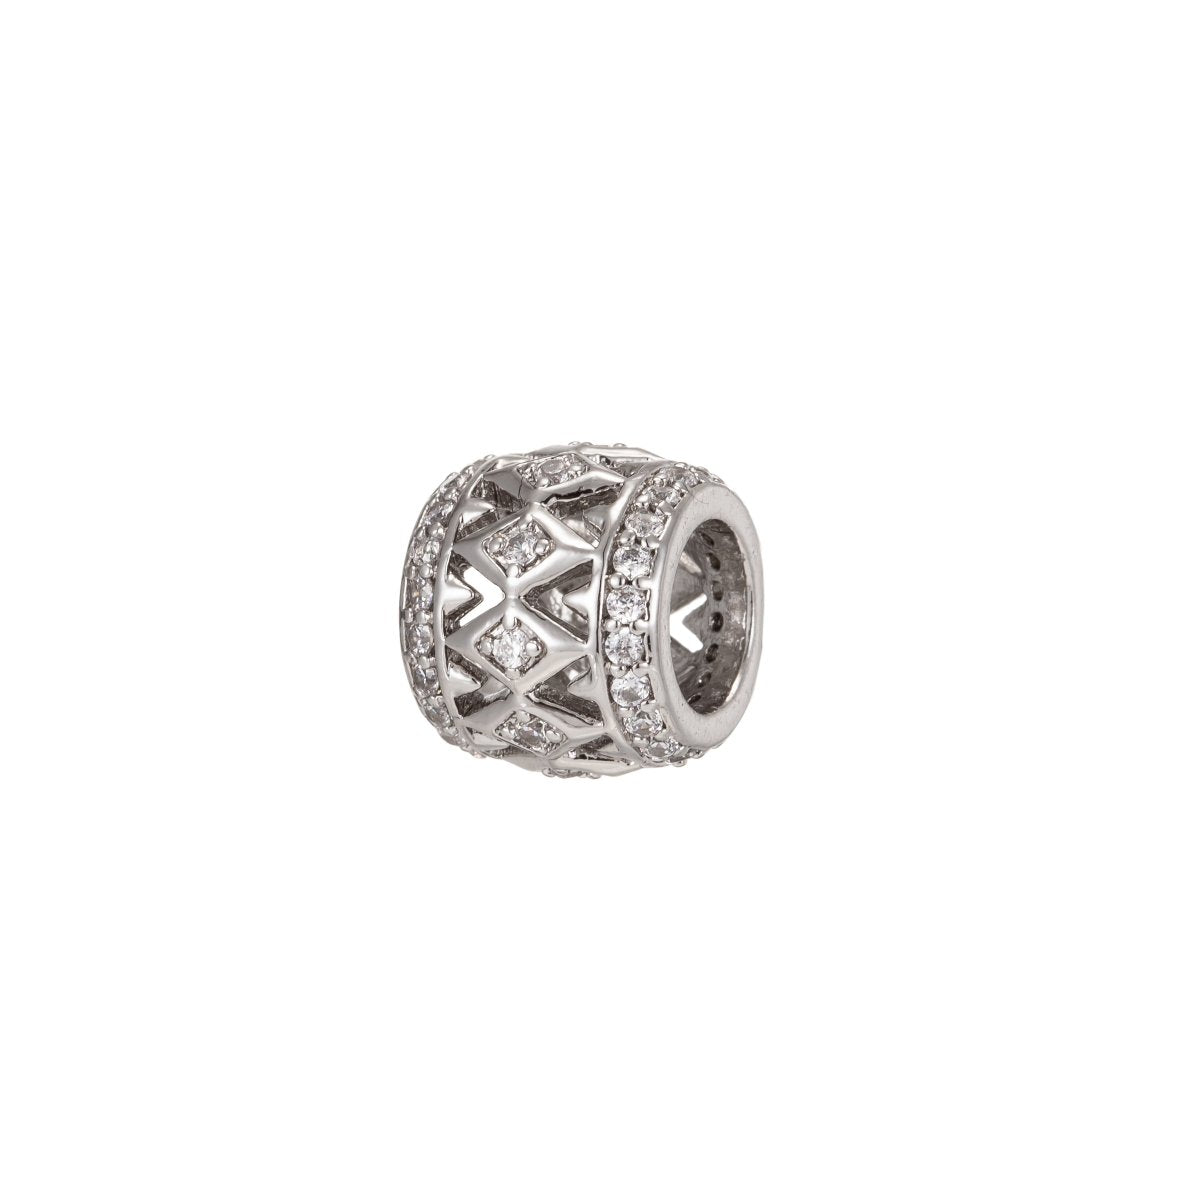 Tiny Square Ornamented Silver Beads Tube CZ Gold Filled Artistic Geometric Jewelry Making Beads Supply B-191 - DLUXCA